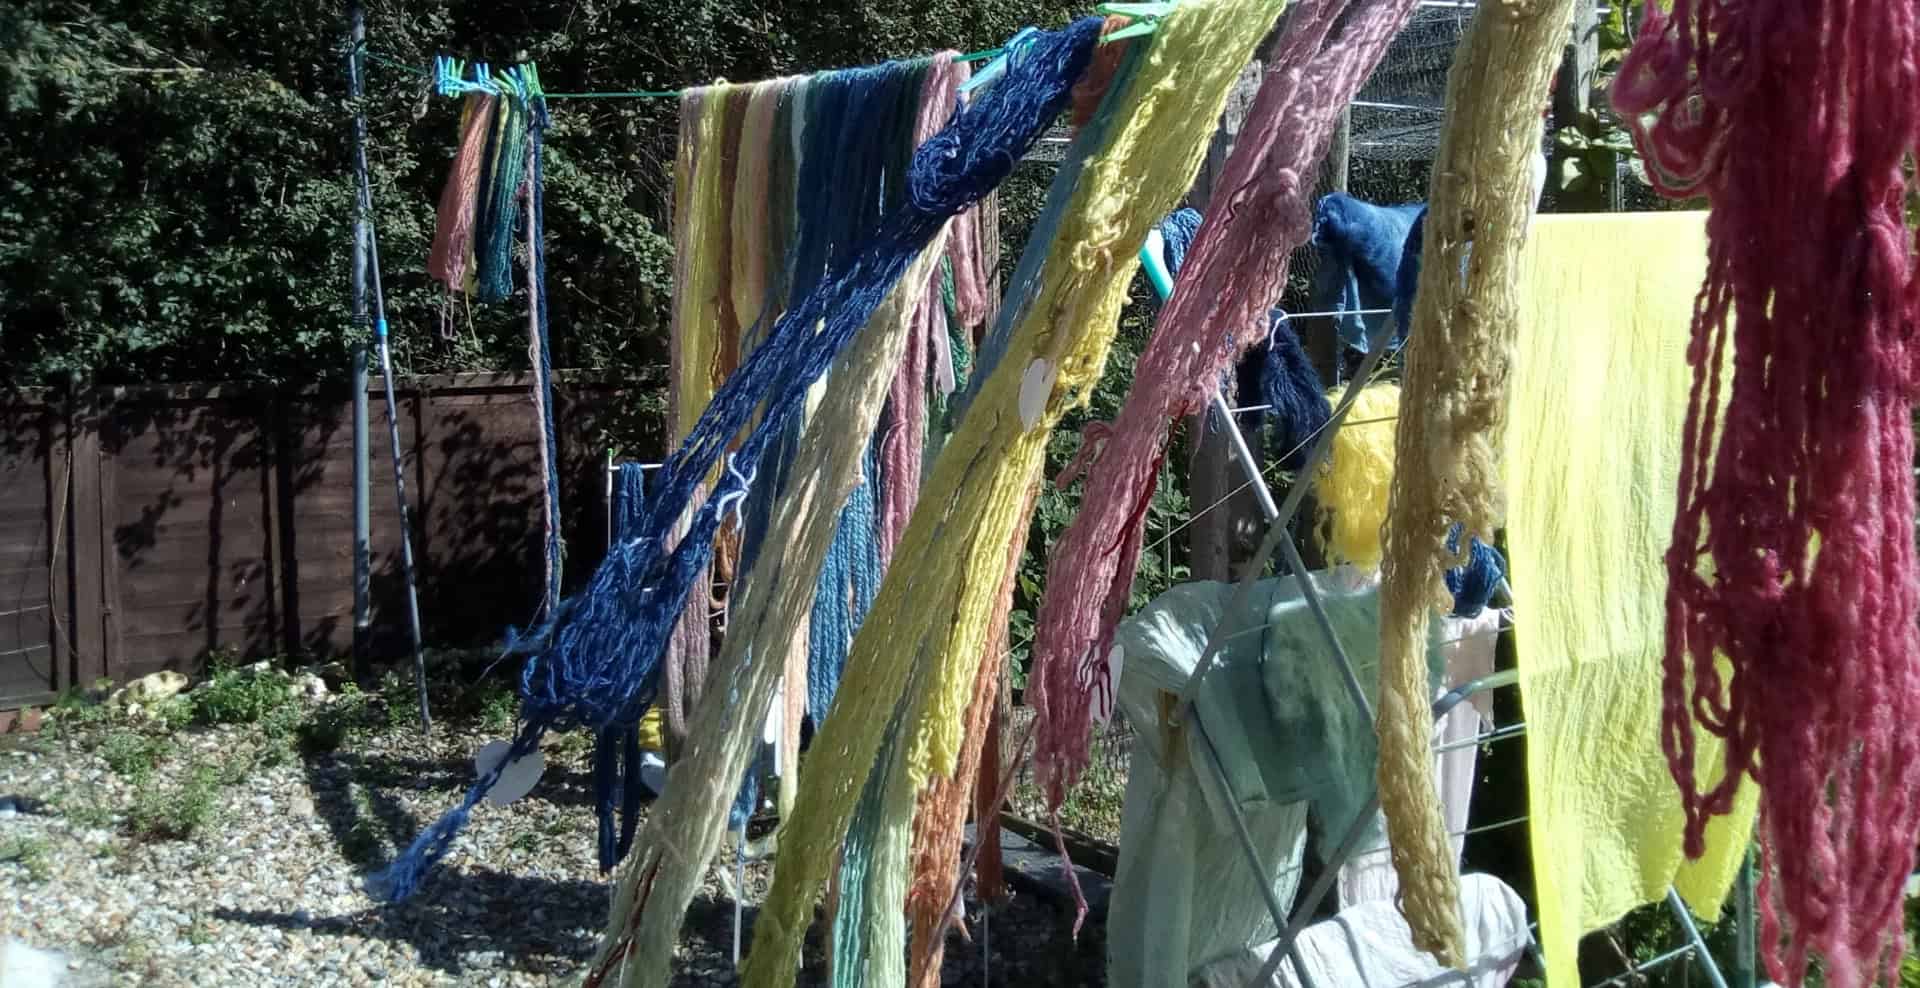 Dyed spinning yarn drying on a clothes line